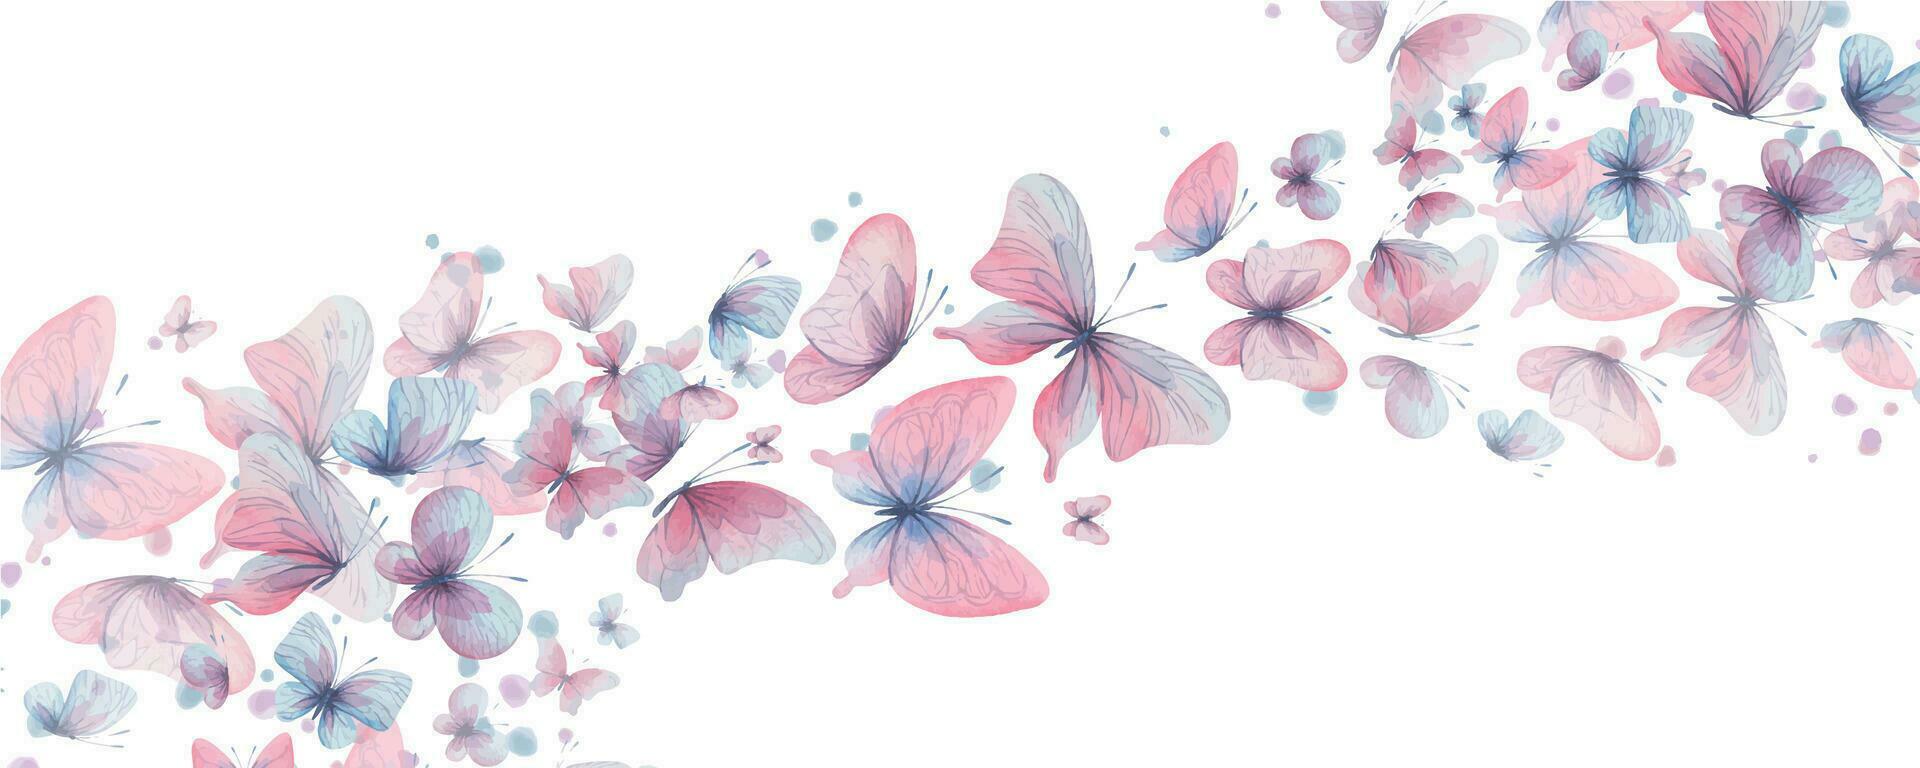 Butterflies are pink, blue, lilac, flying, delicate with wings and splashes of paint. Hand drawn watercolor illustration. Motion composition on a white background, for design. vector